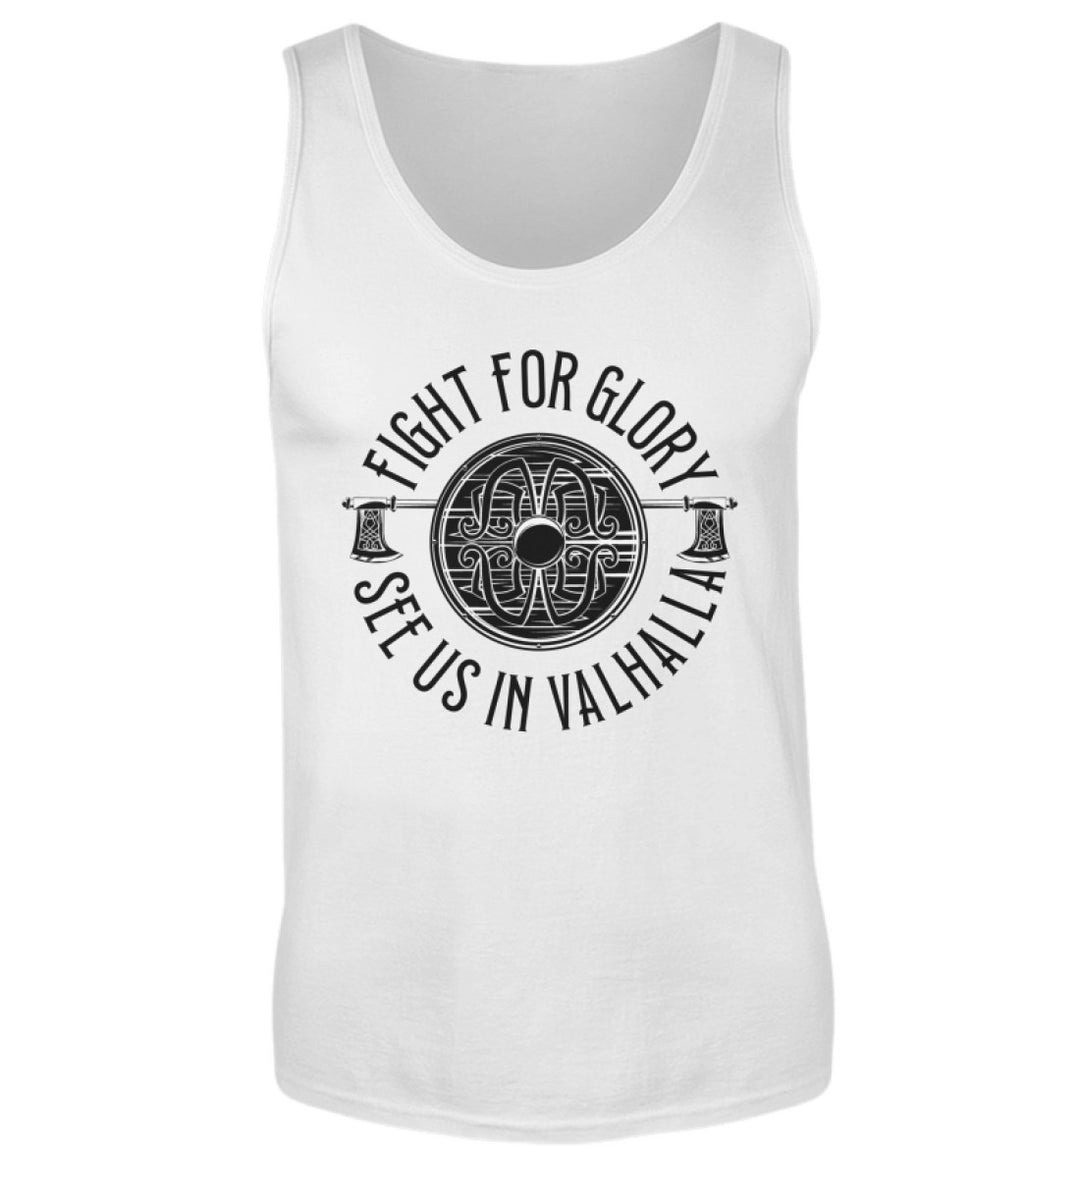 Fight for Glory, See us in Valhalla  - Herren Tanktop